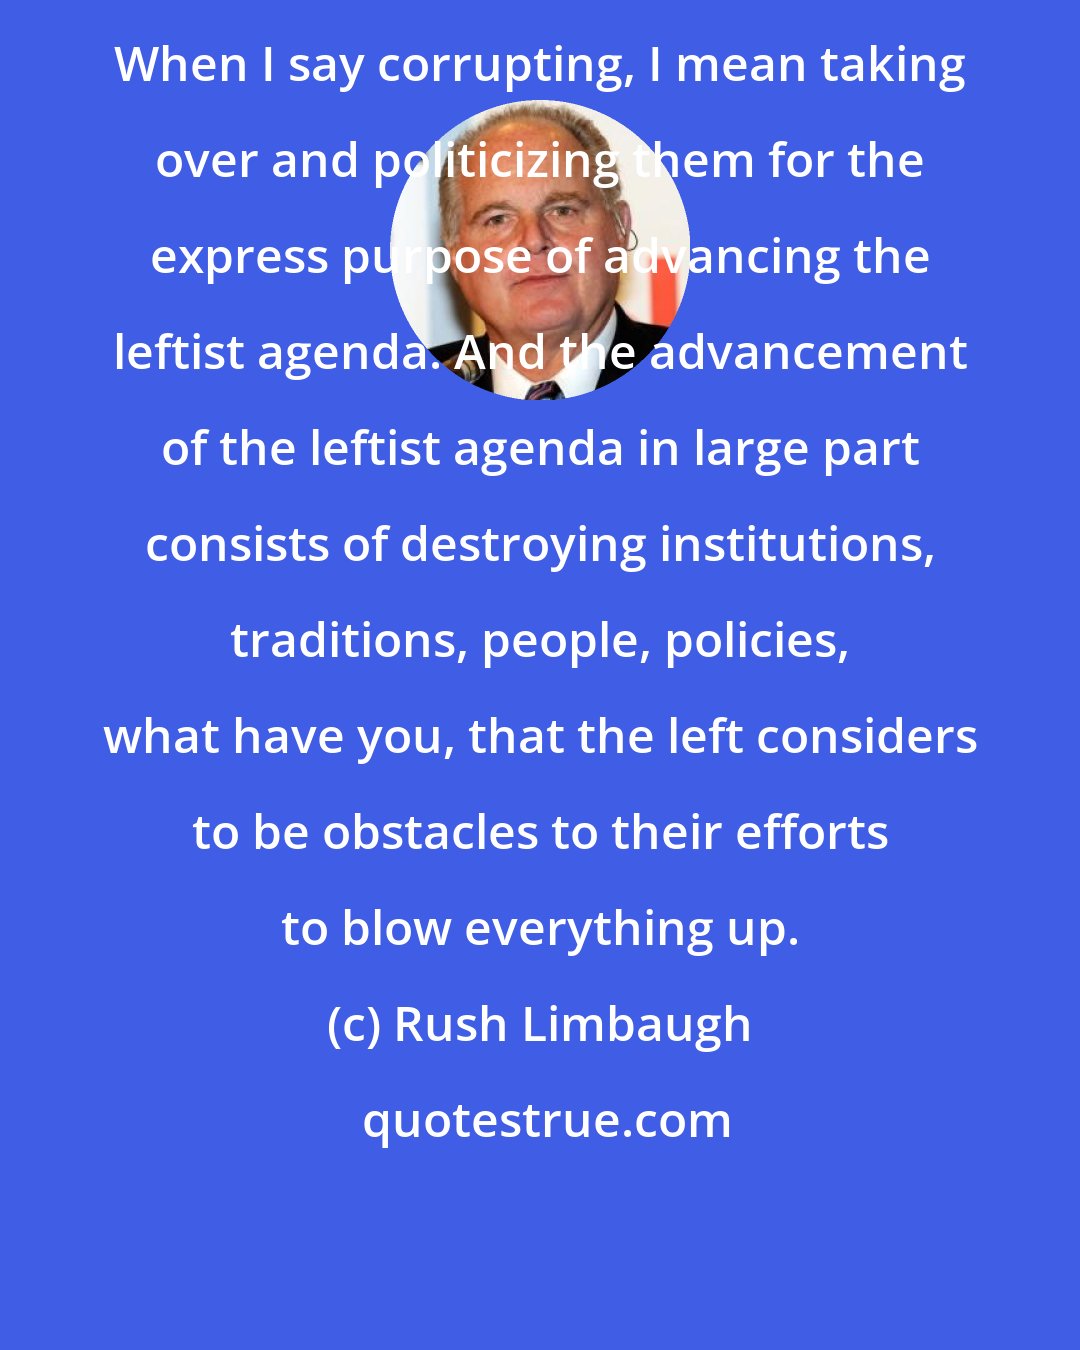 Rush Limbaugh: When I say corrupting, I mean taking over and politicizing them for the express purpose of advancing the leftist agenda. And the advancement of the leftist agenda in large part consists of destroying institutions, traditions, people, policies, what have you, that the left considers to be obstacles to their efforts to blow everything up.